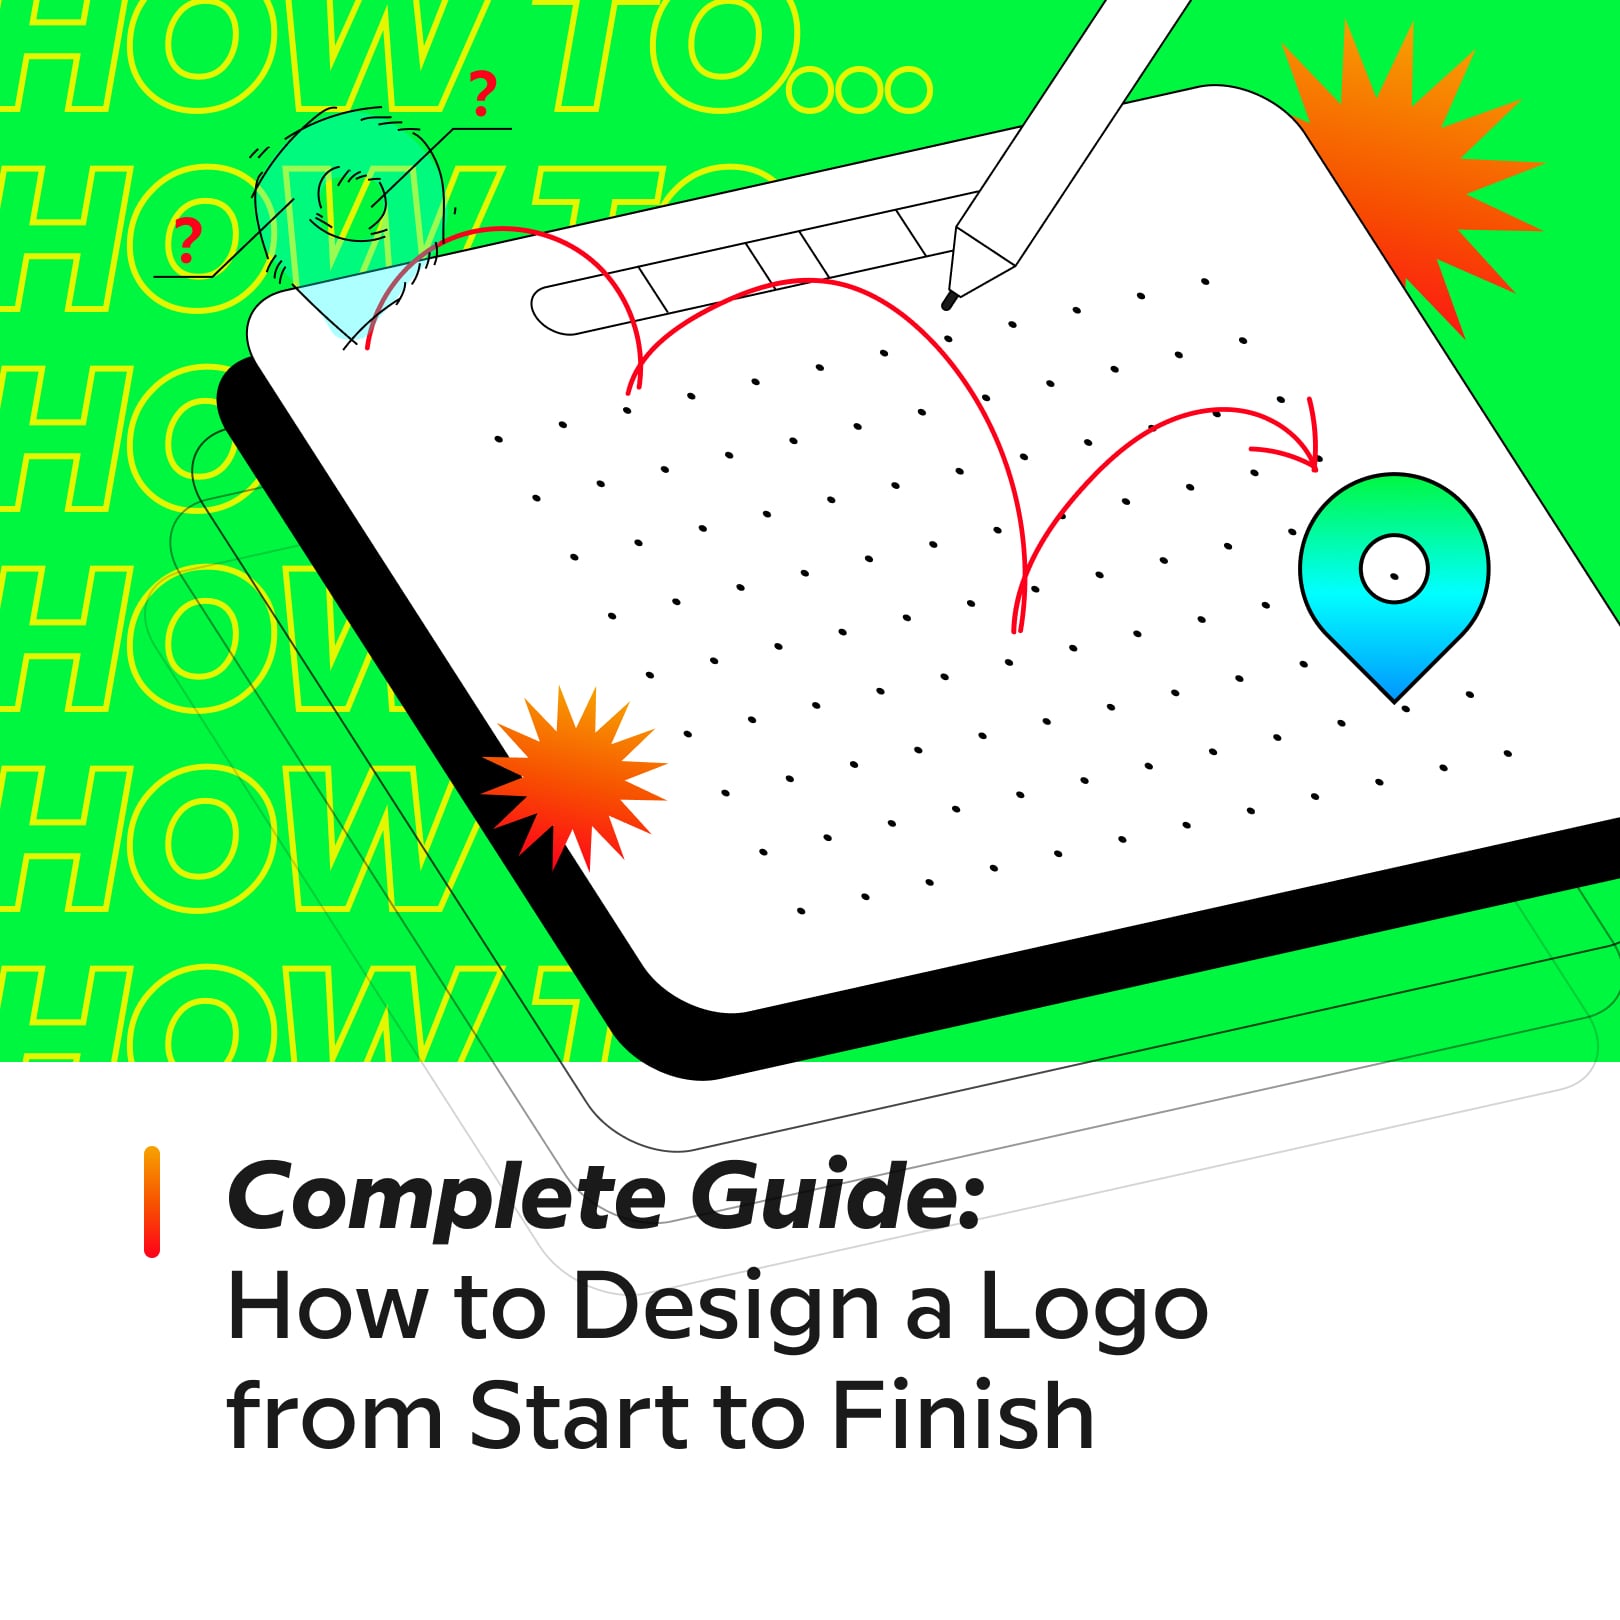 58131Complete Guide: How to Design a Logo from Start to Finish